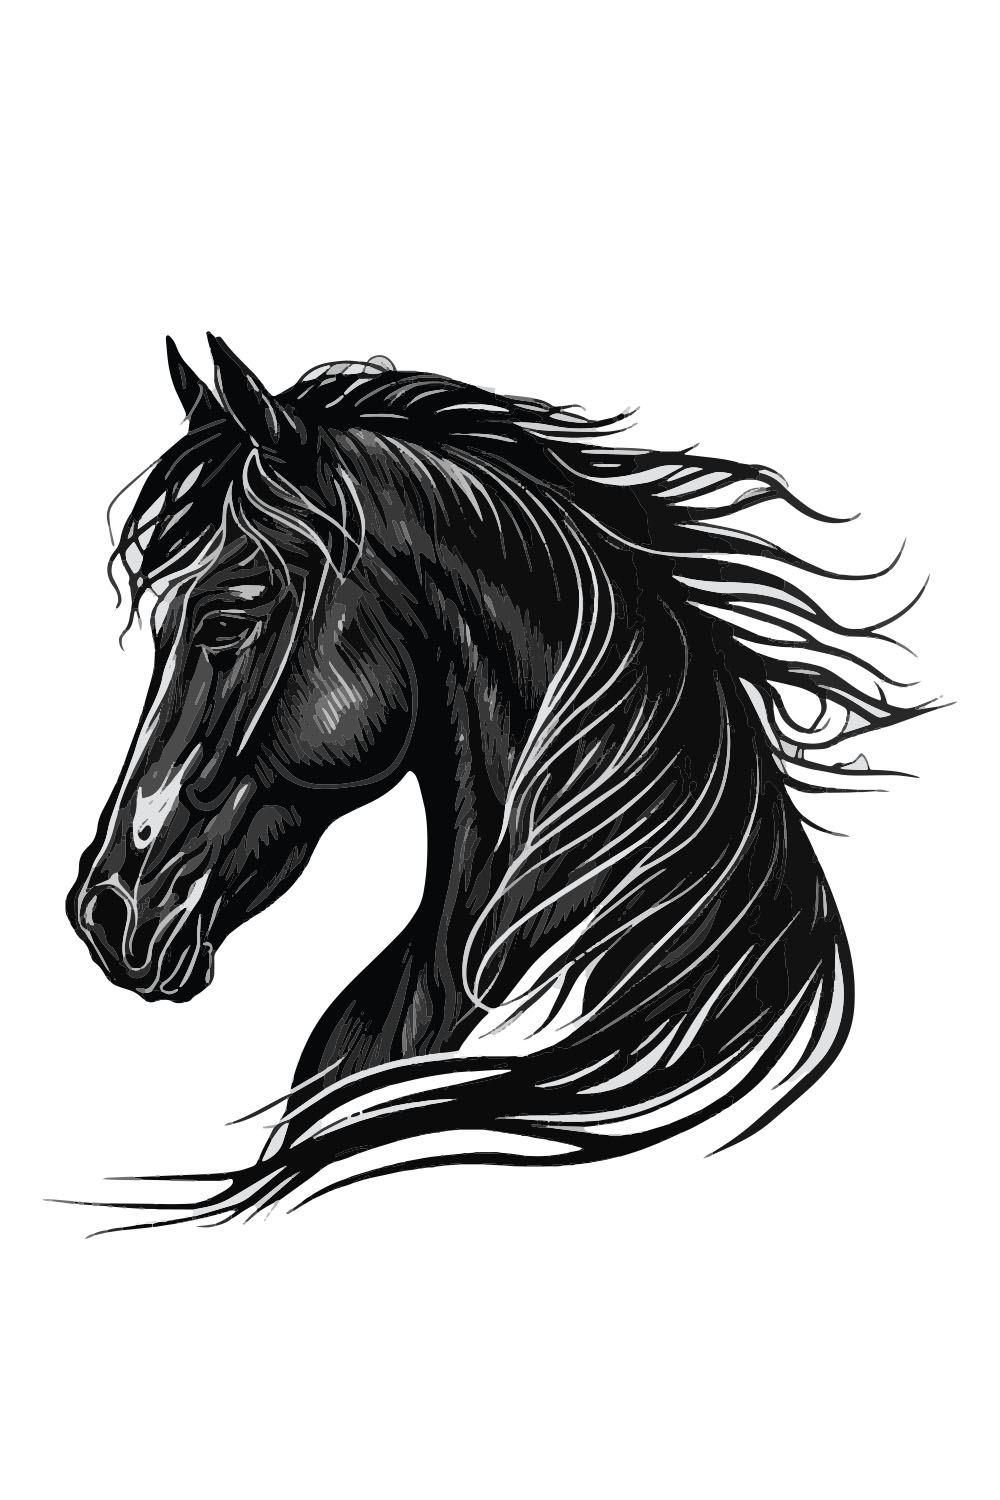 Pinterest | Horse tattoo, Horse wall art canvases, Horse drawings